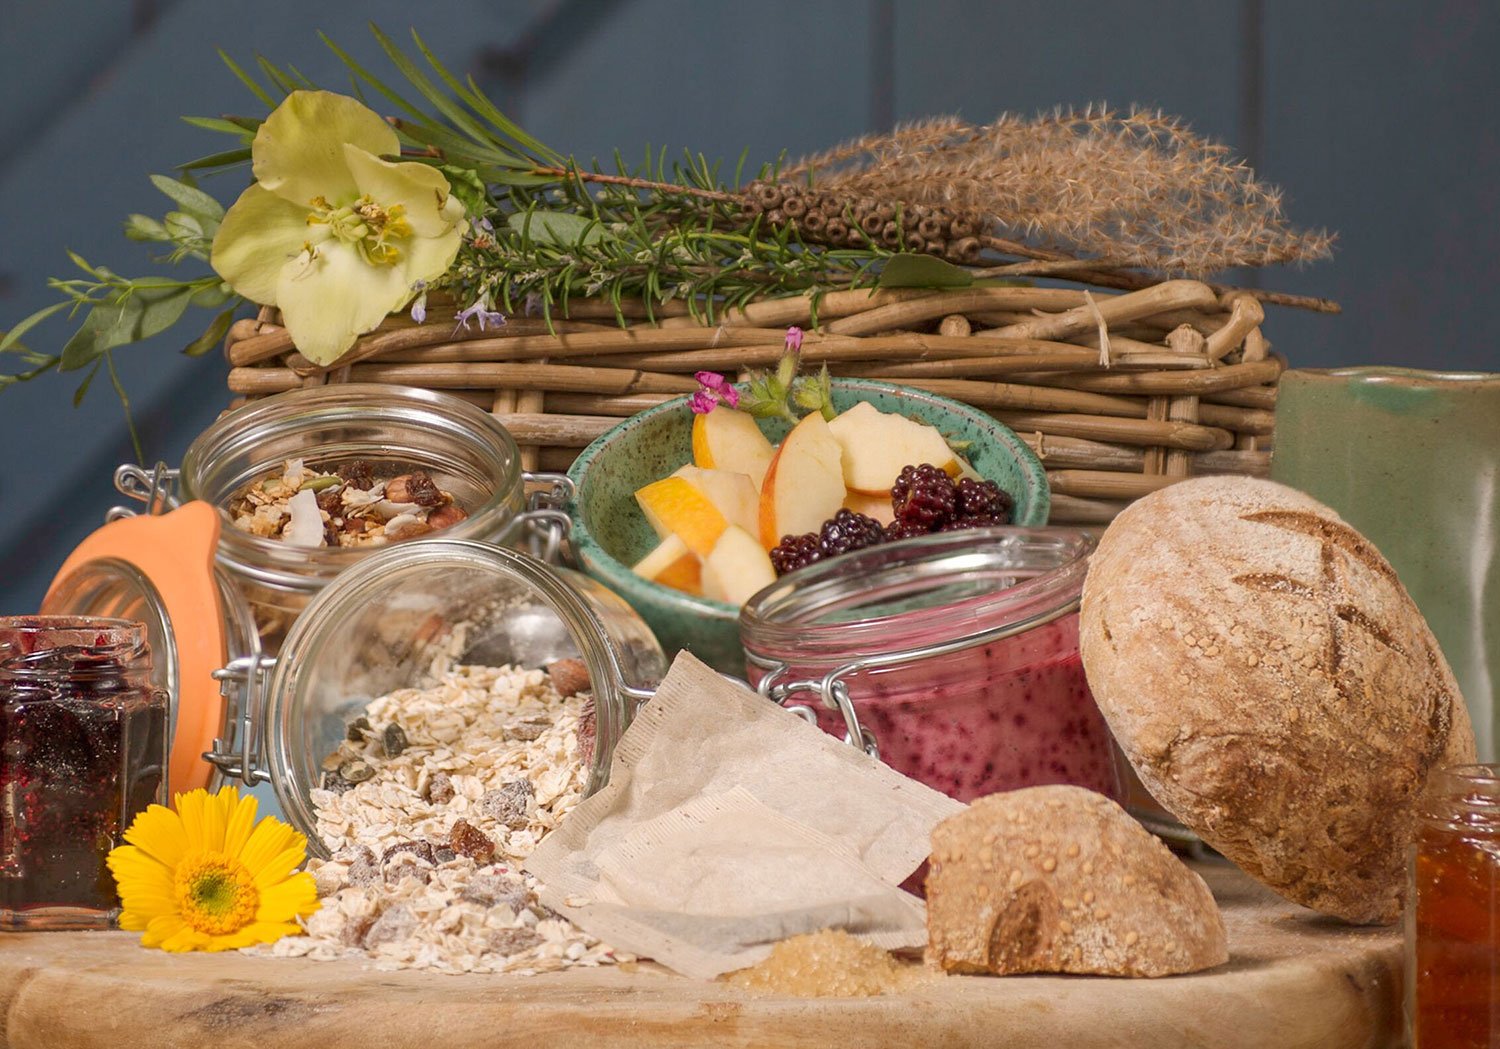 Taste of Cotna Eco Retreat more raw vegan breakfast hamper for holiday guests with home-made muesli, fruit kefir, home-made jam, organic home-grown fruit, sourdough bread and Cornish apple juice from the Roseland